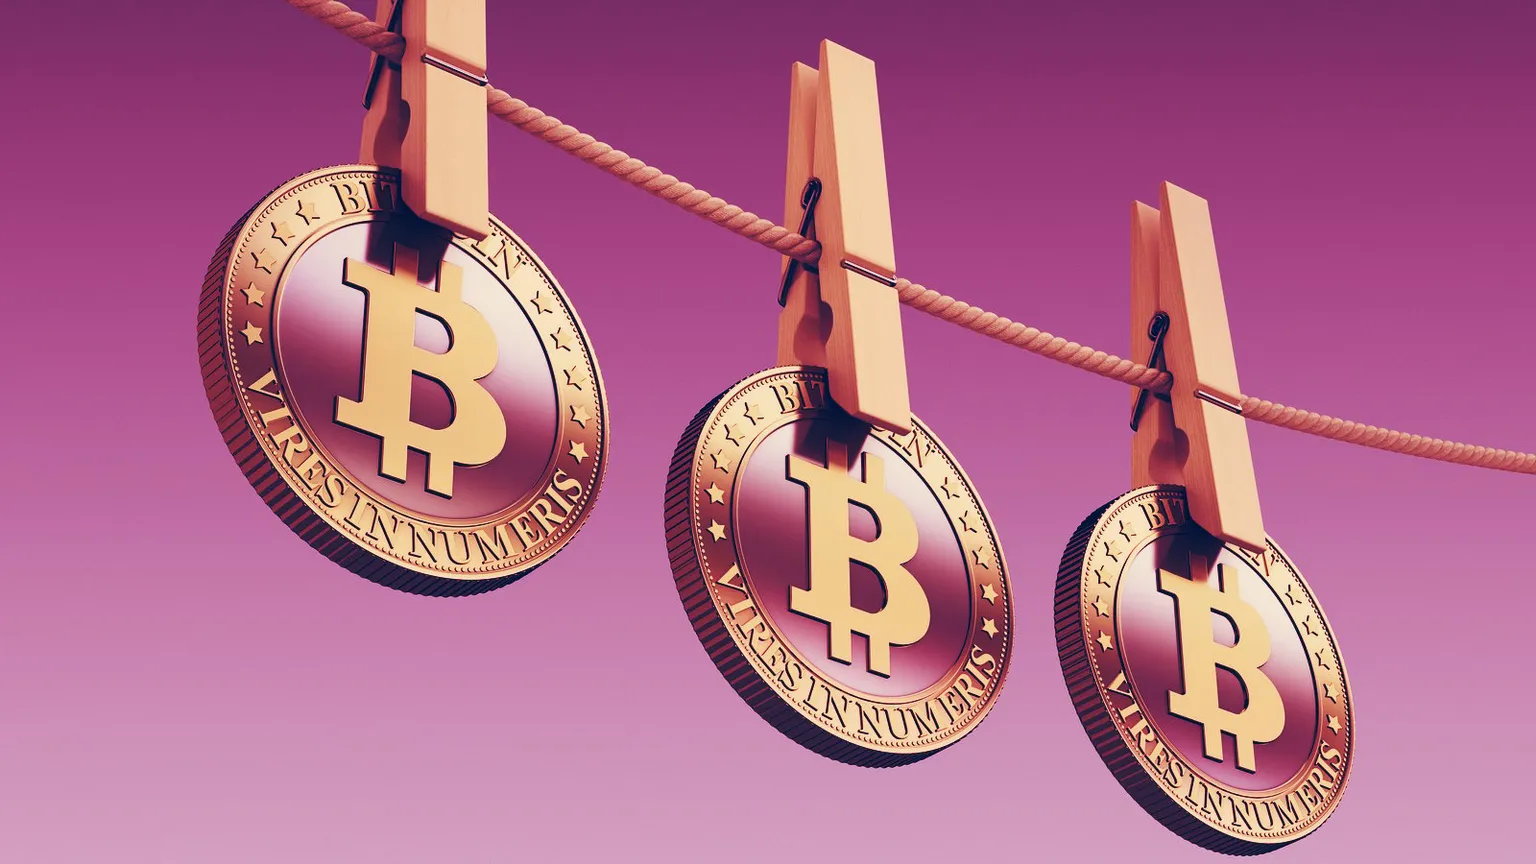 LocalBitcoins received the highest amount of illicit crypto in 2019. Image: Shutterstock